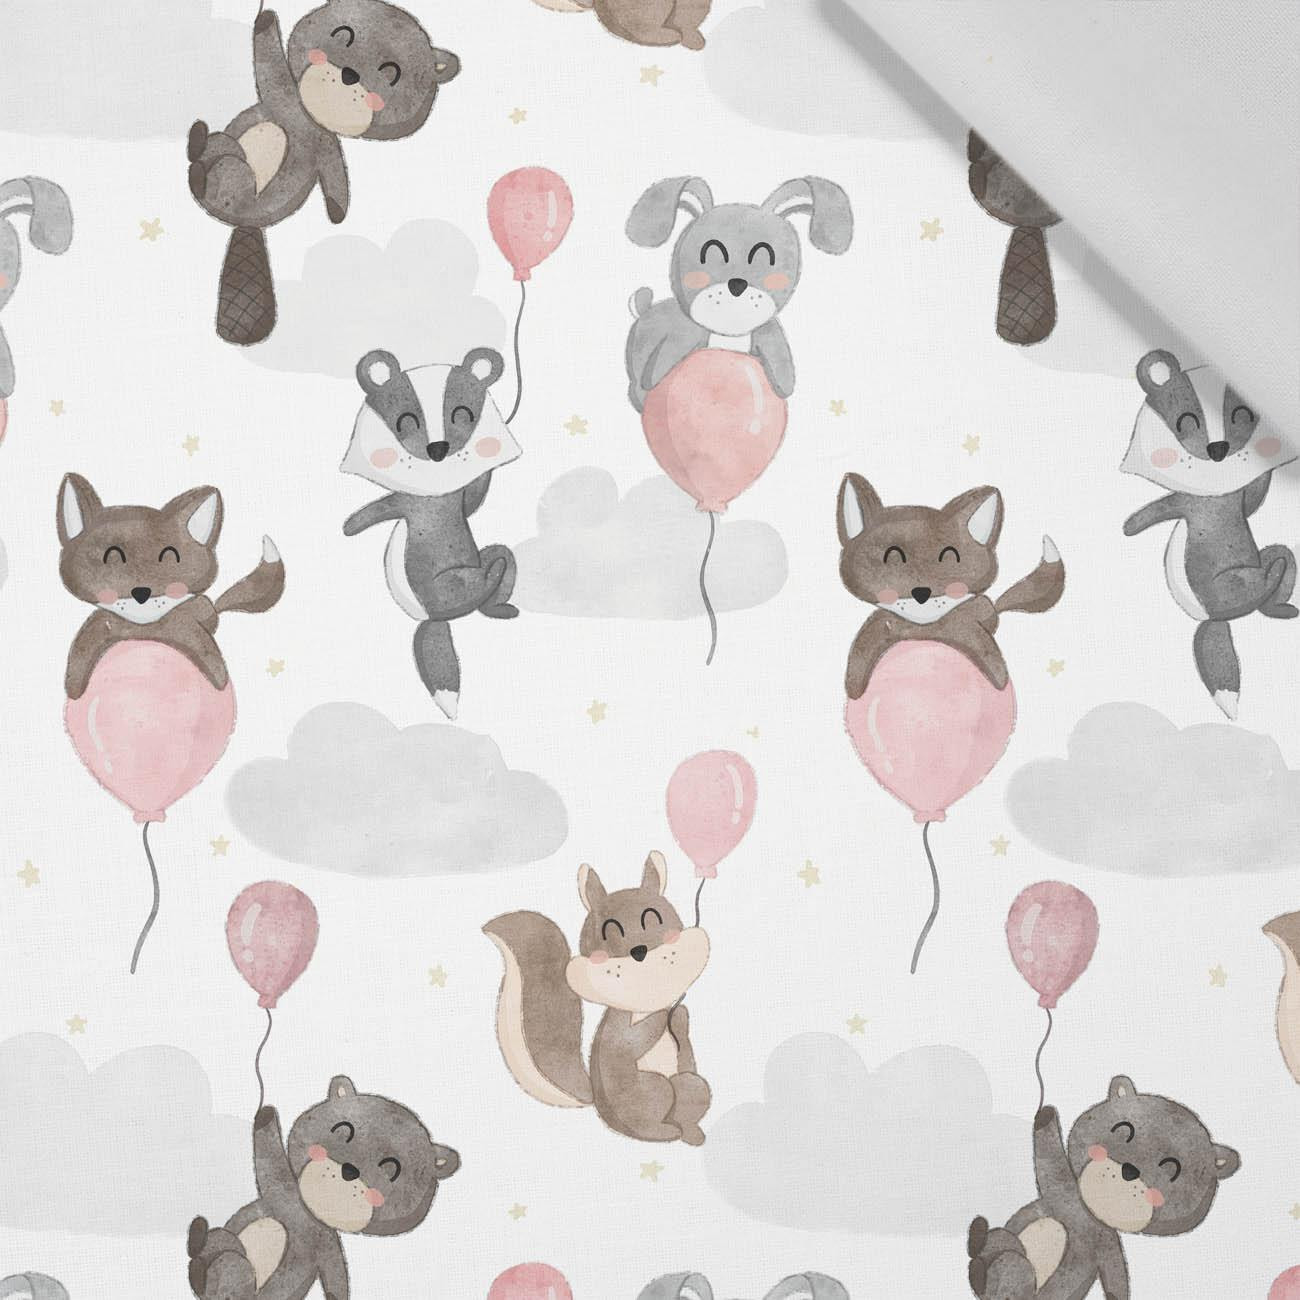 ANIMALS IN CLOUDS pat. 1 - Cotton woven fabric